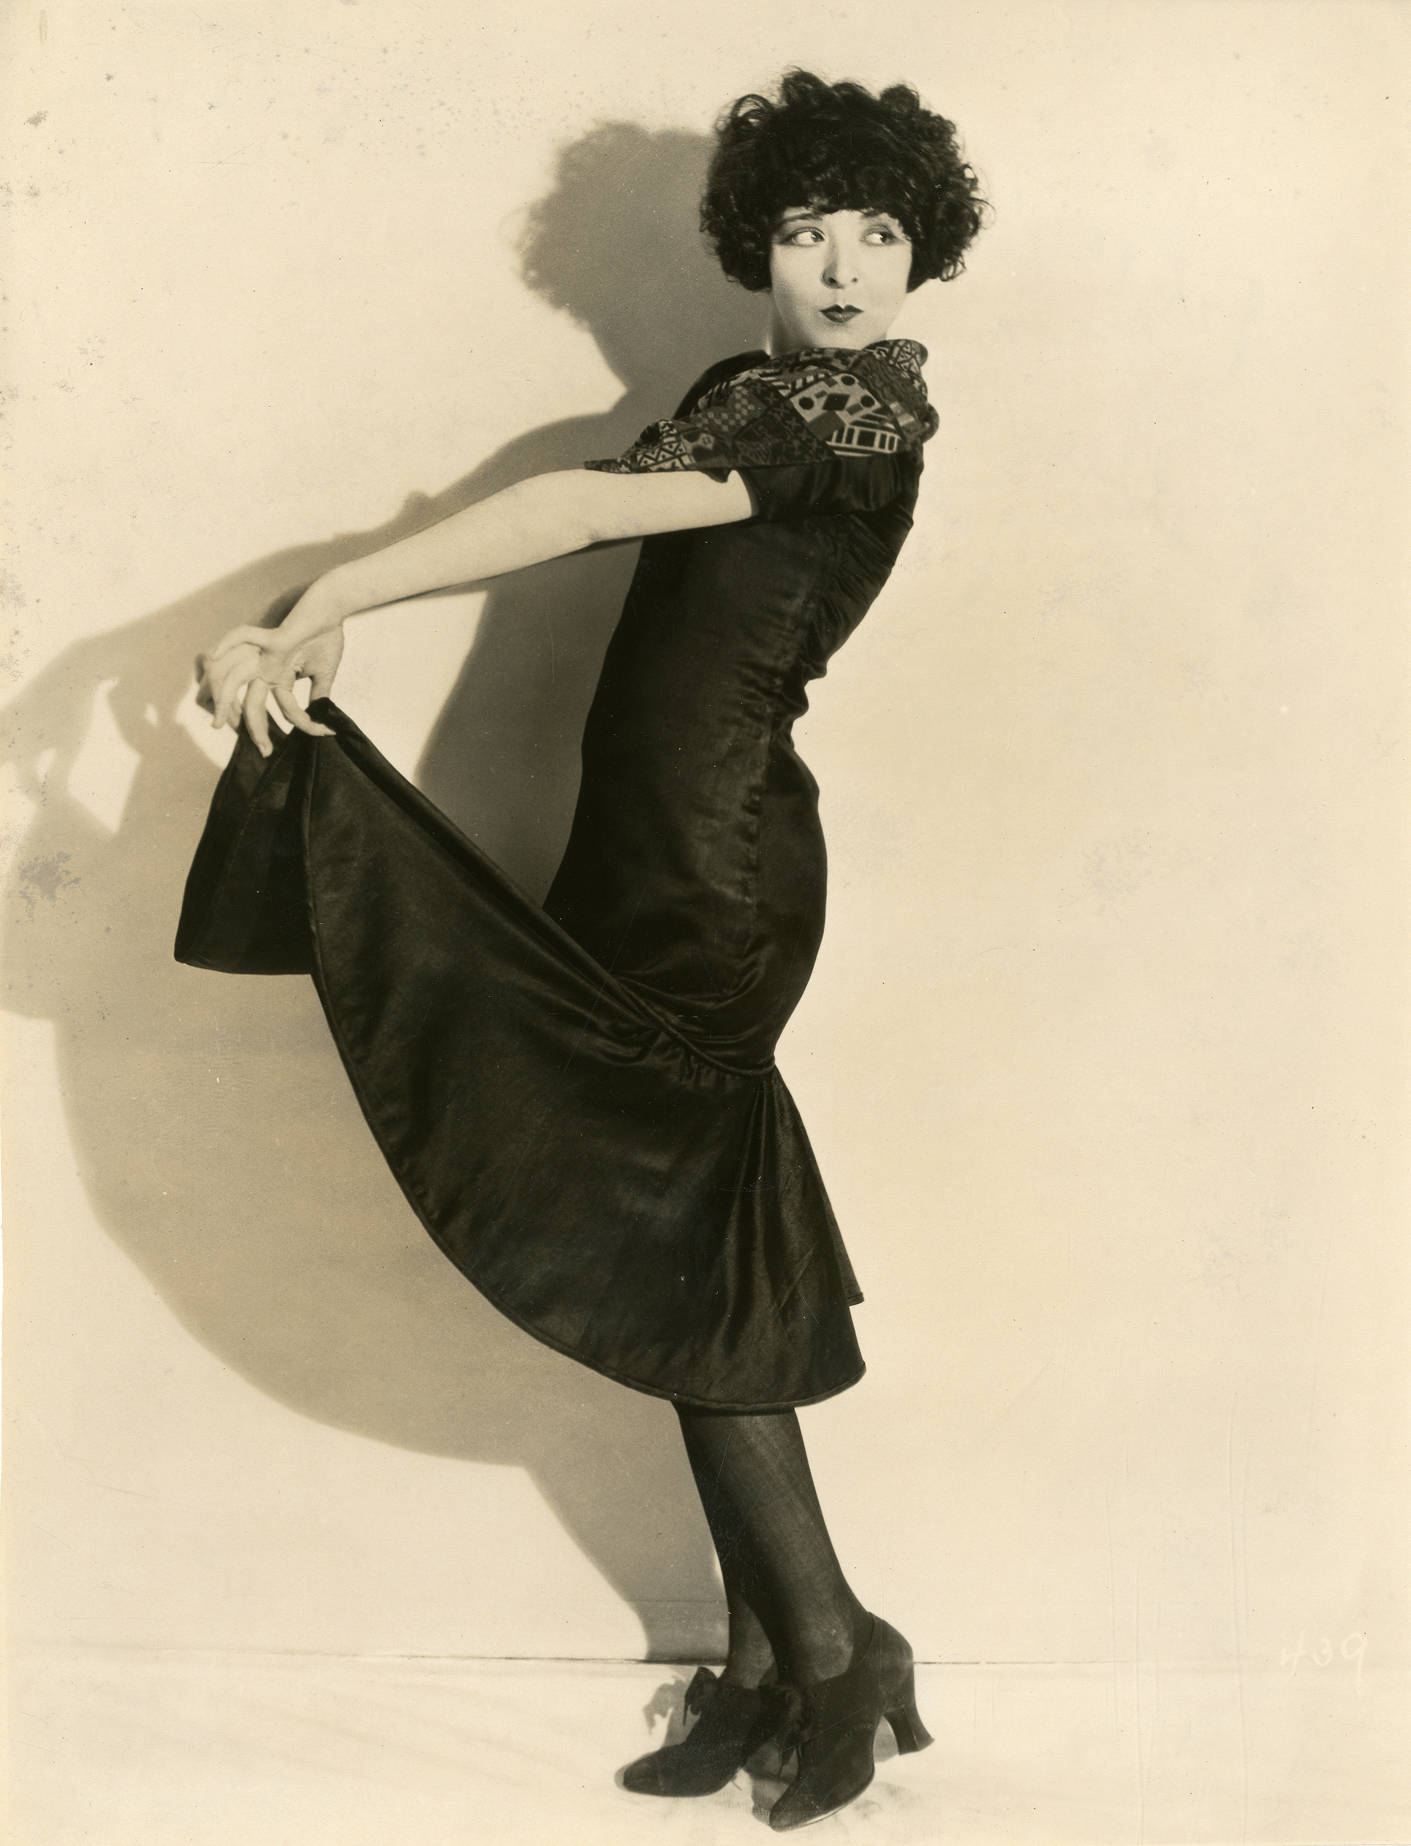 Miseria Muscular Acercarse File:Colleen Moore, film actress (SAYRE 6888).jpg - Wikimedia Commons